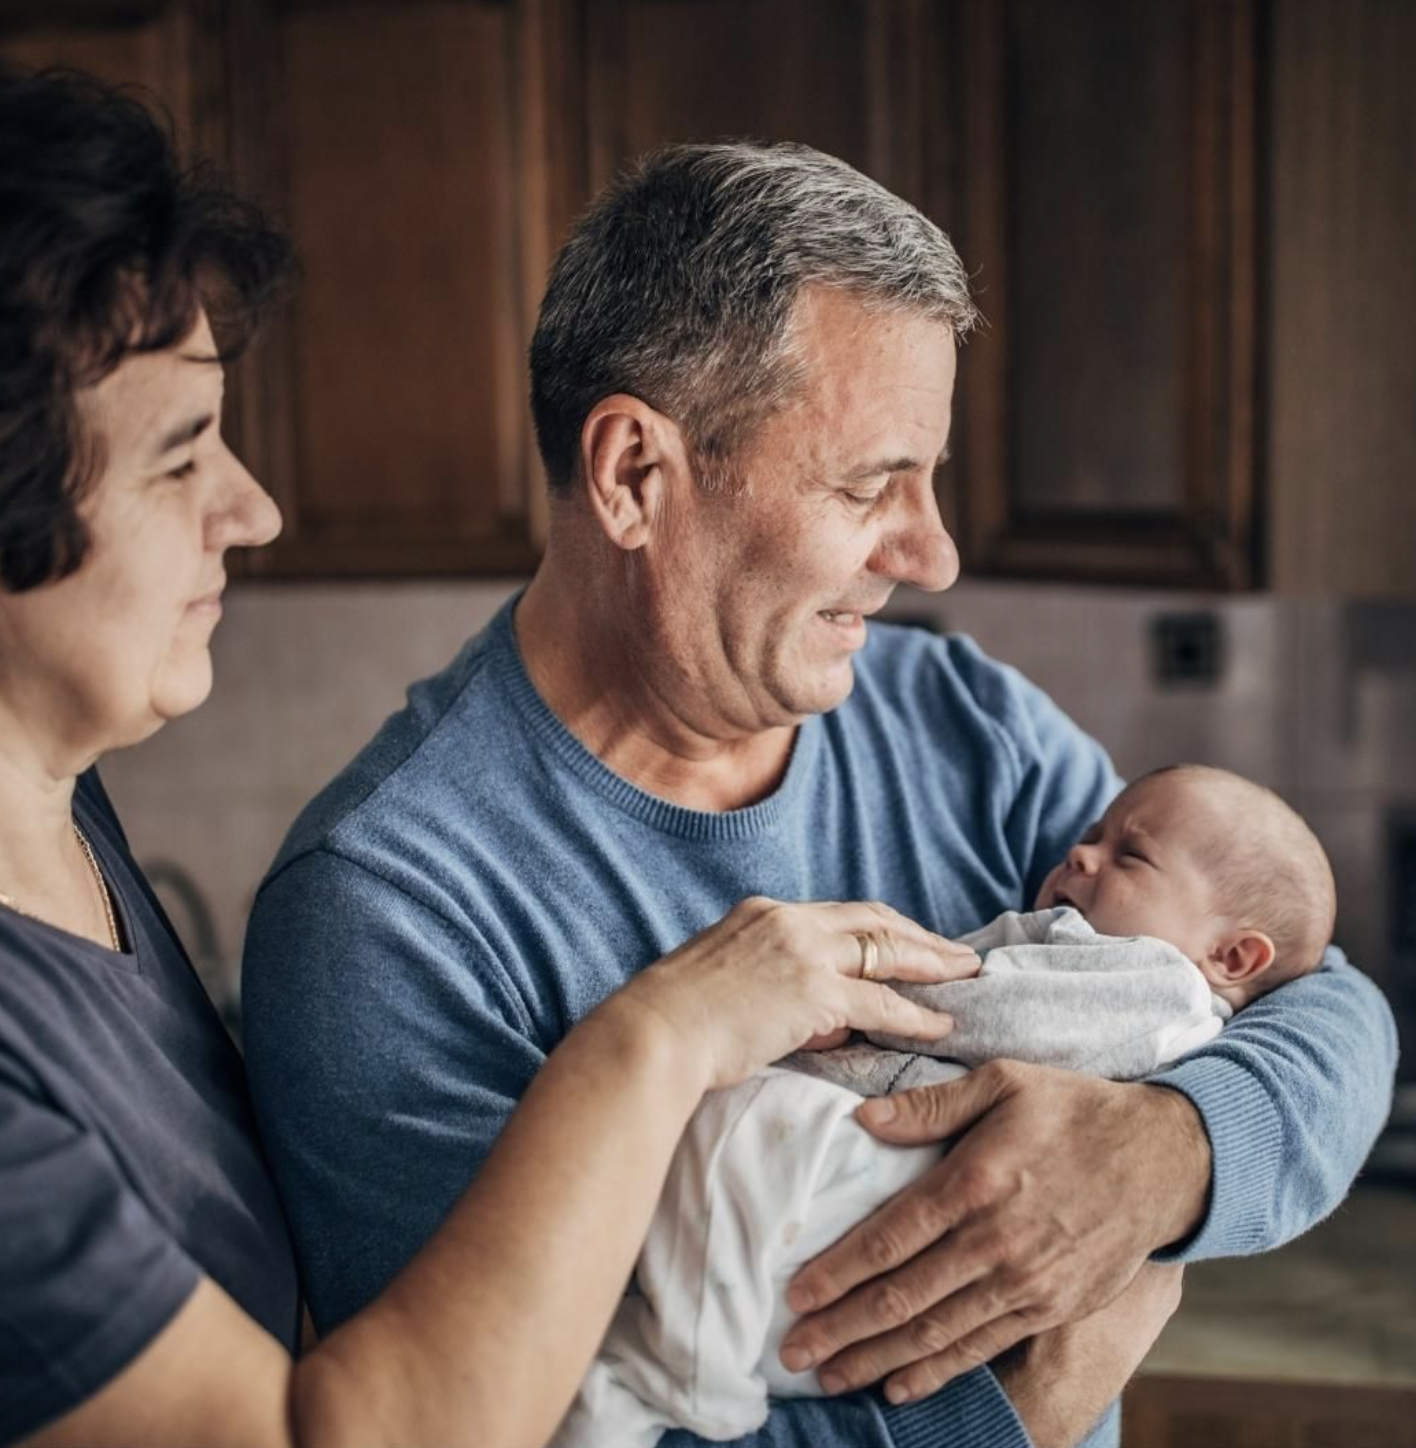 Grandparents’ Home: A Baby-Proofing Guide for Safety and Flexibility